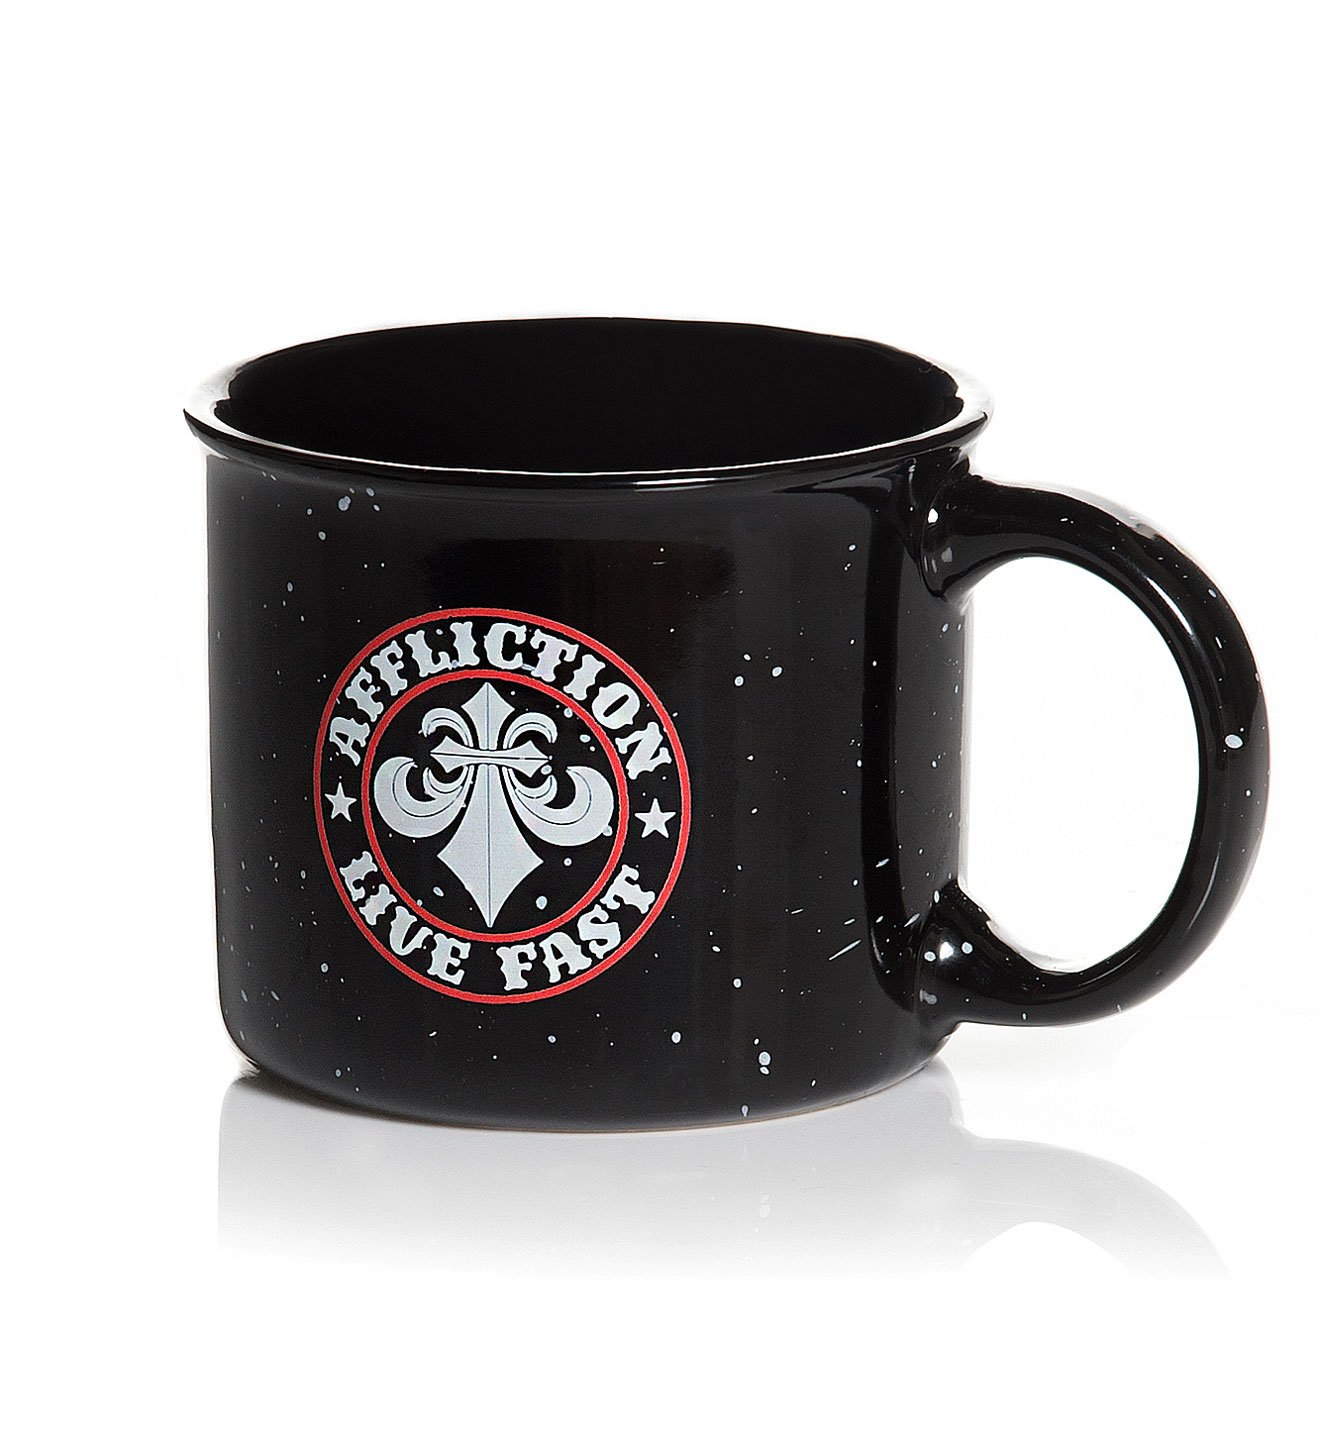 Divio Mug - Mens Other Accessories - Affliction Clothing